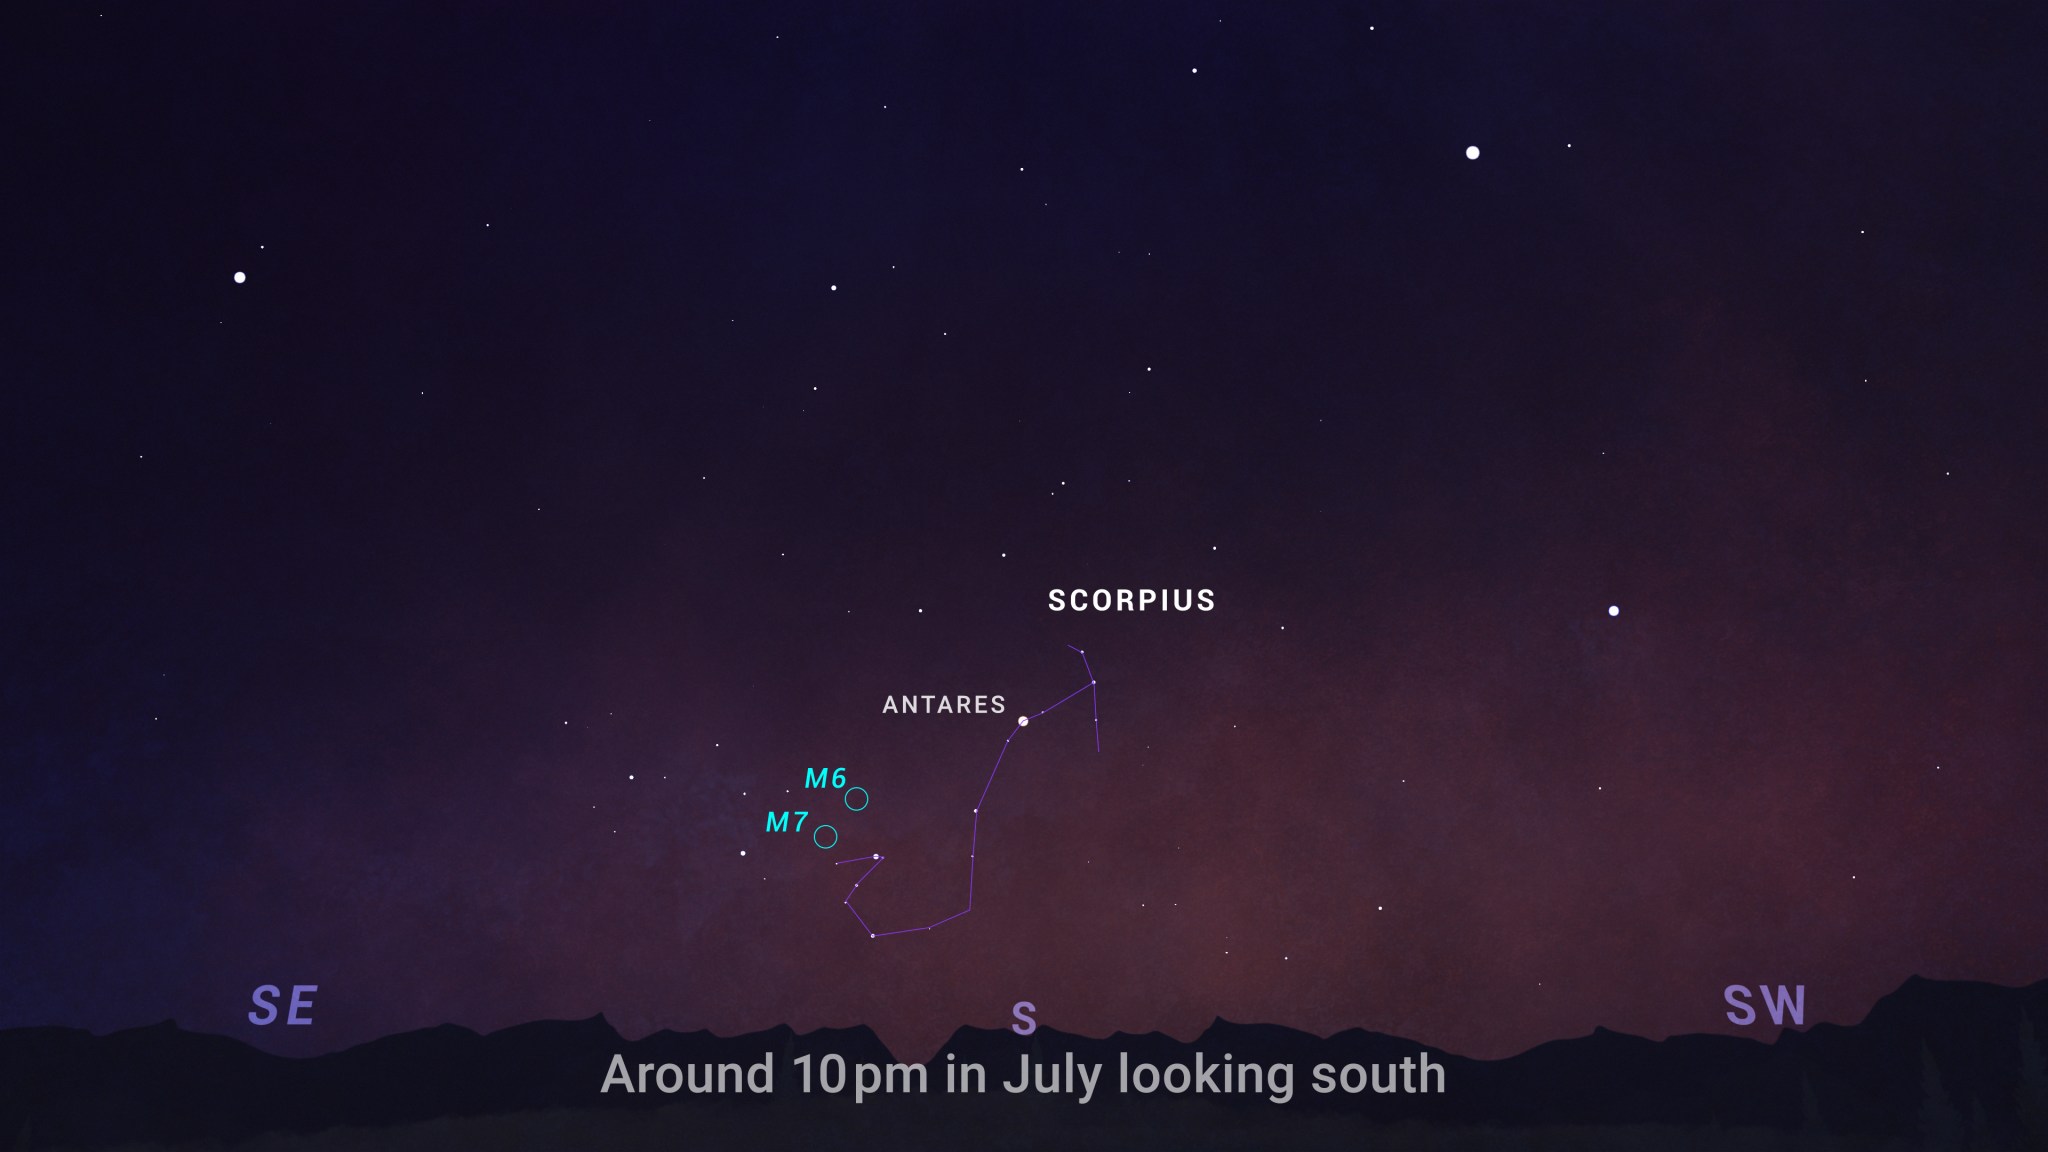 An illustrated sky chart shows the stars in Scorpius linked by lines to form the scorpion shape of the constellation. Bright star Antares is labeled in the upper part of the constellation. M6 and M7 are indicated by circled inscribed around their positions on the sky.